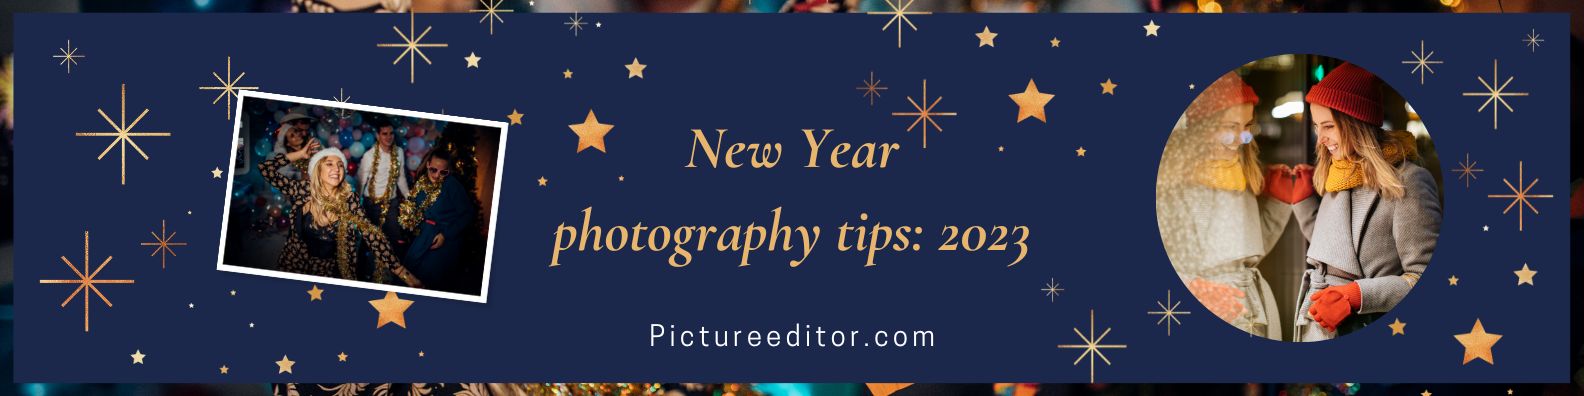 New Year photography tips